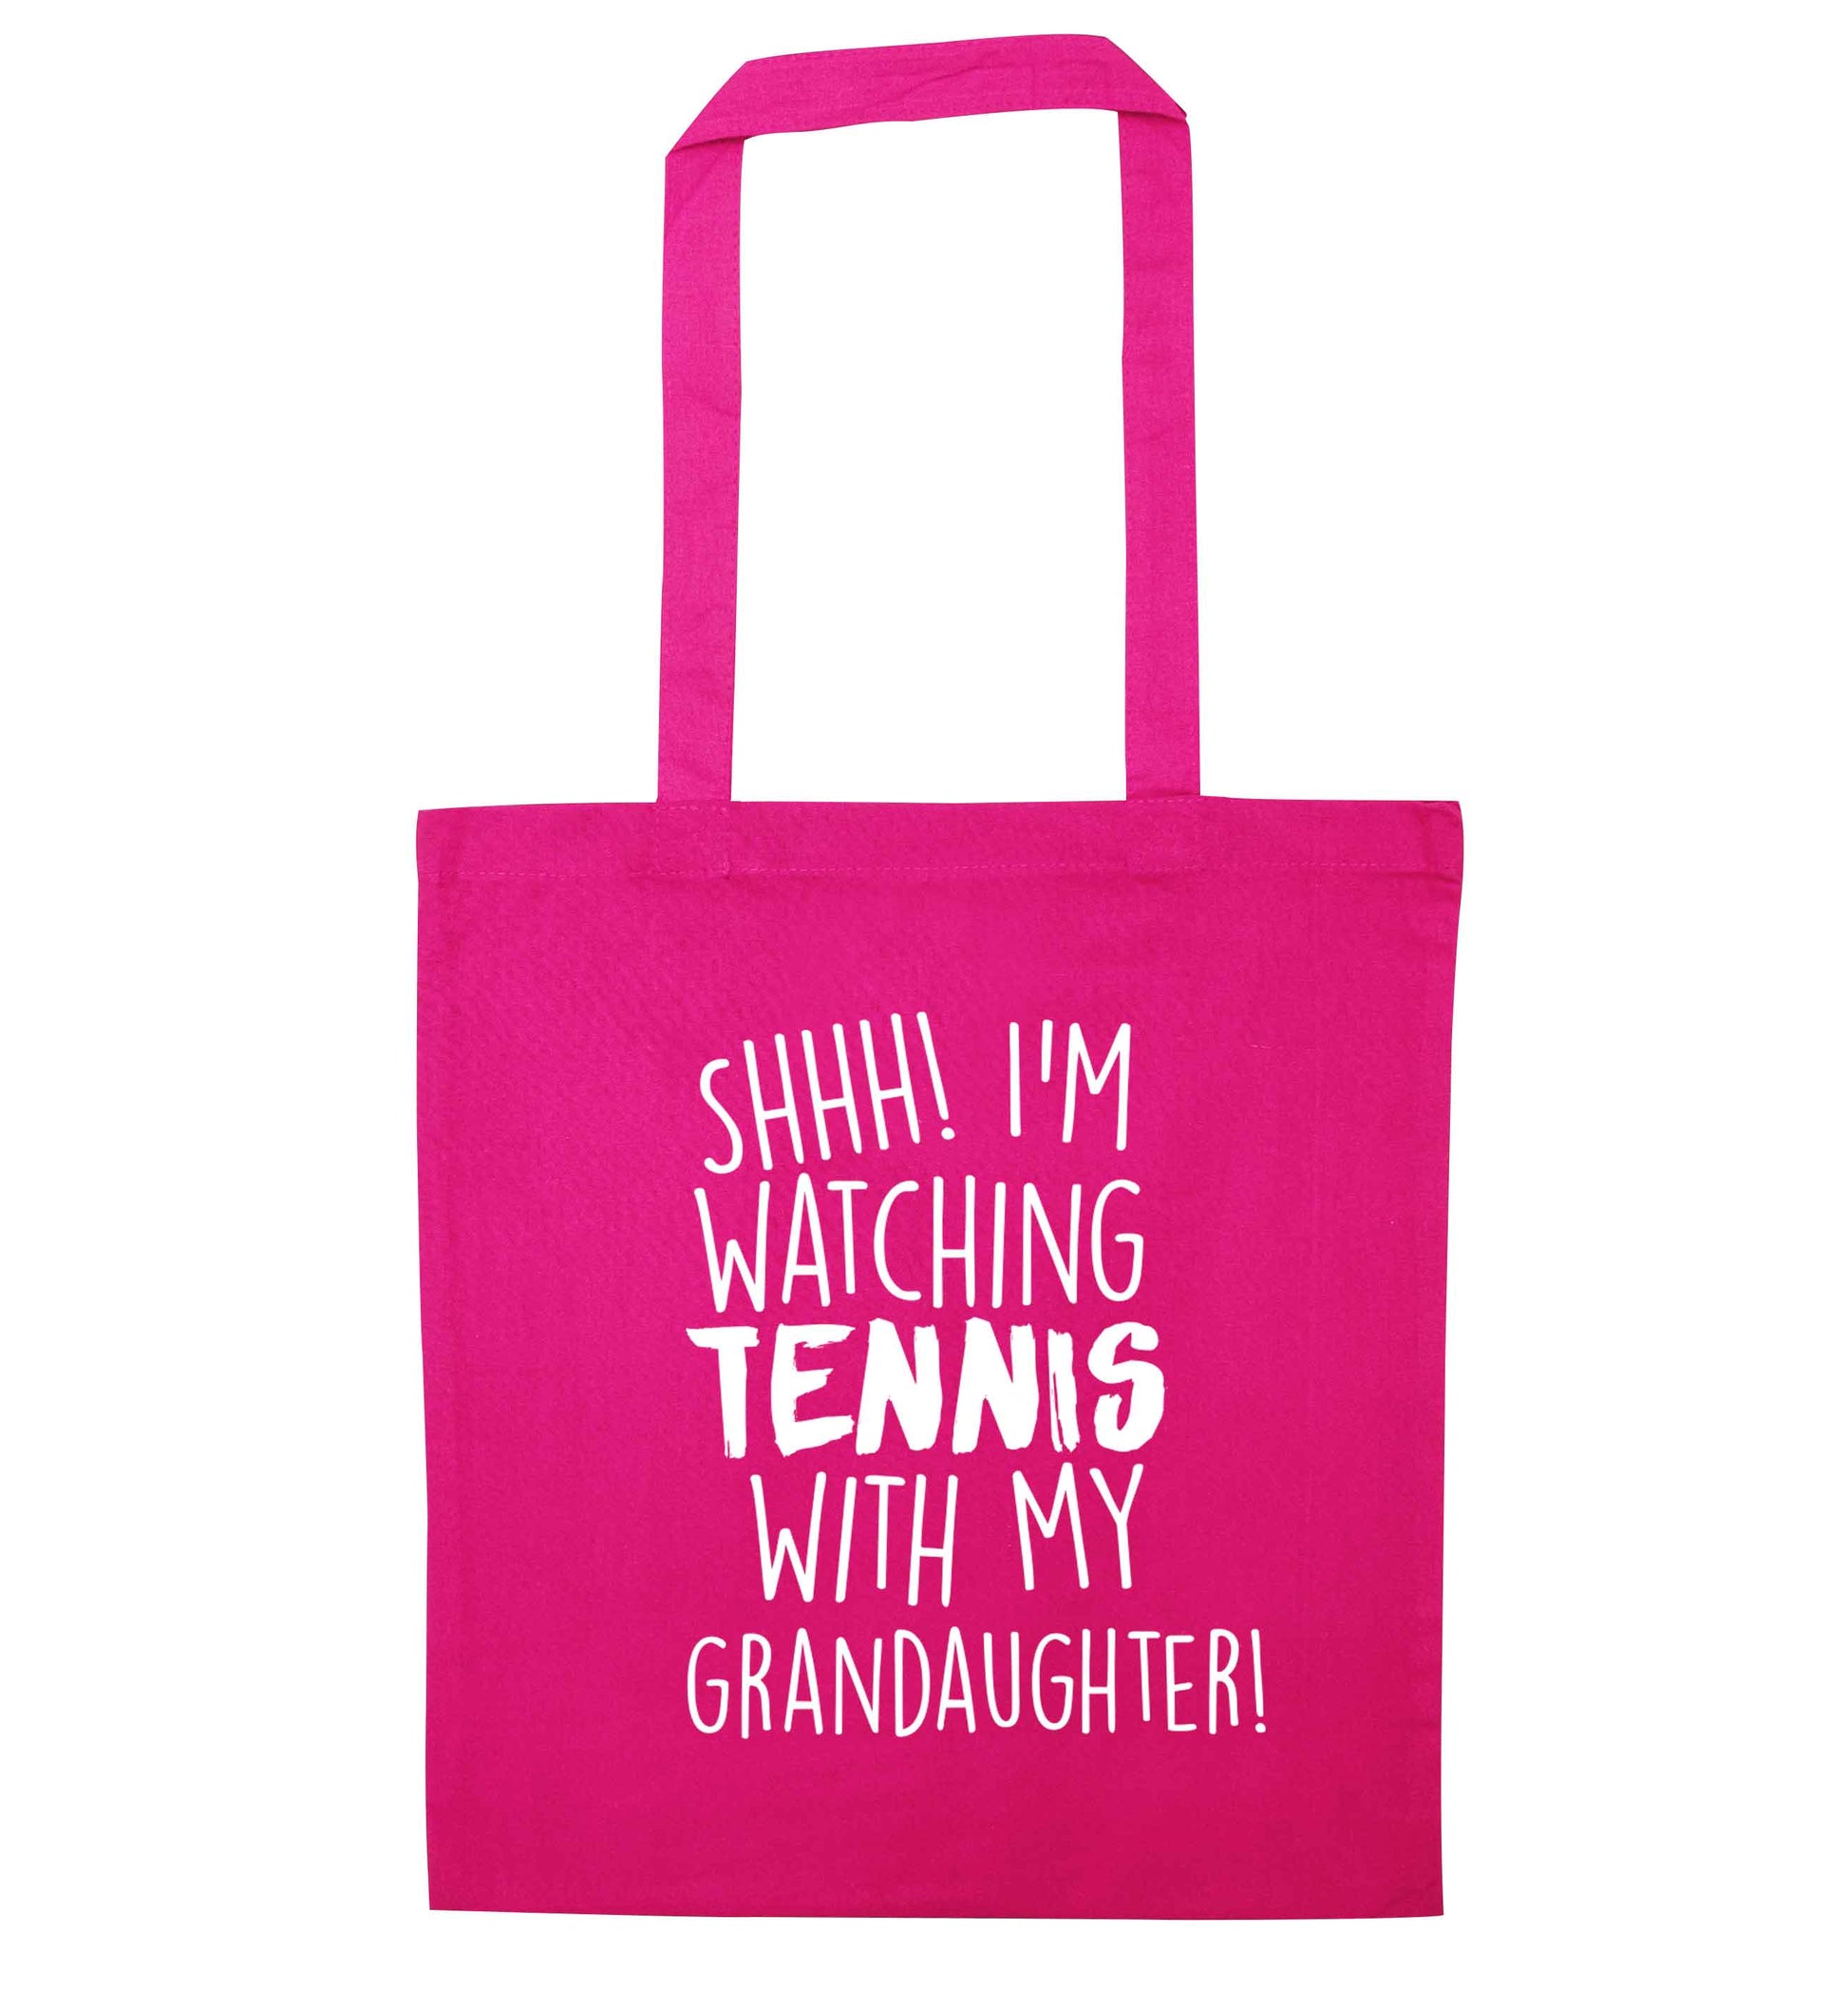 Shh! I'm watching tennis with my granddaughter! pink tote bag